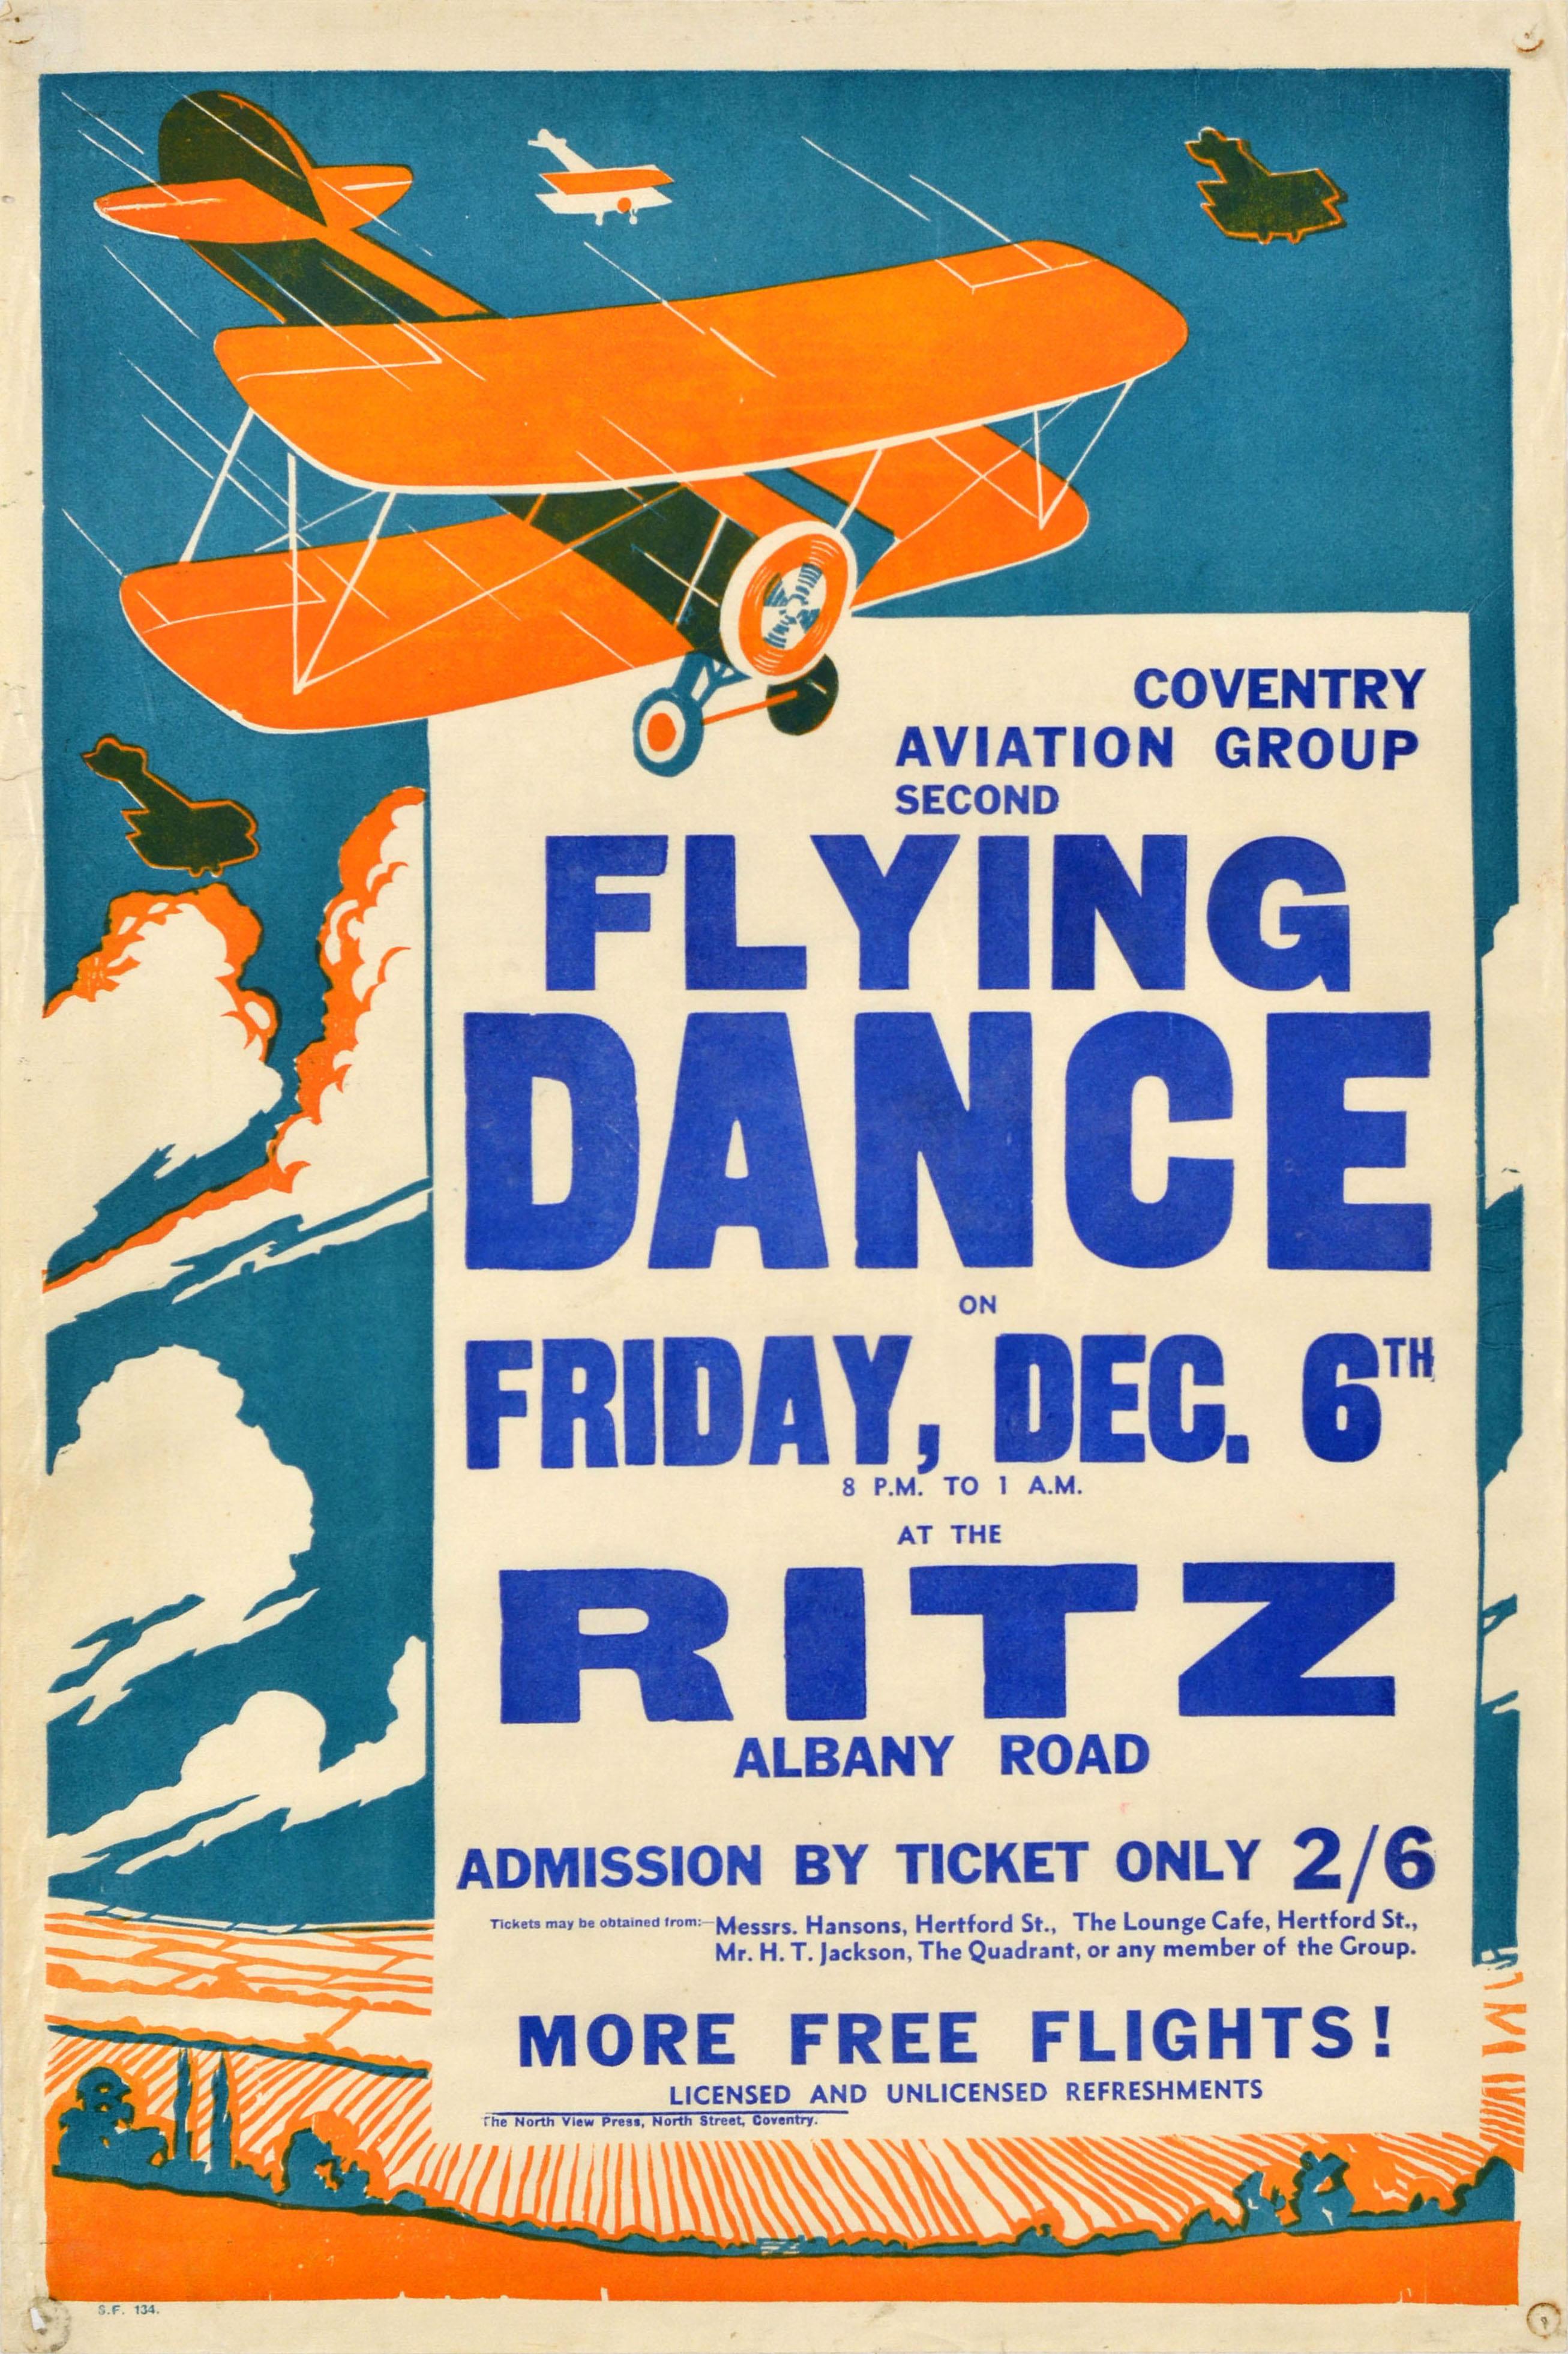 Unknown Print - Original Vintage Advertising Poster Flying Dance Coventry Aviation Group Plane